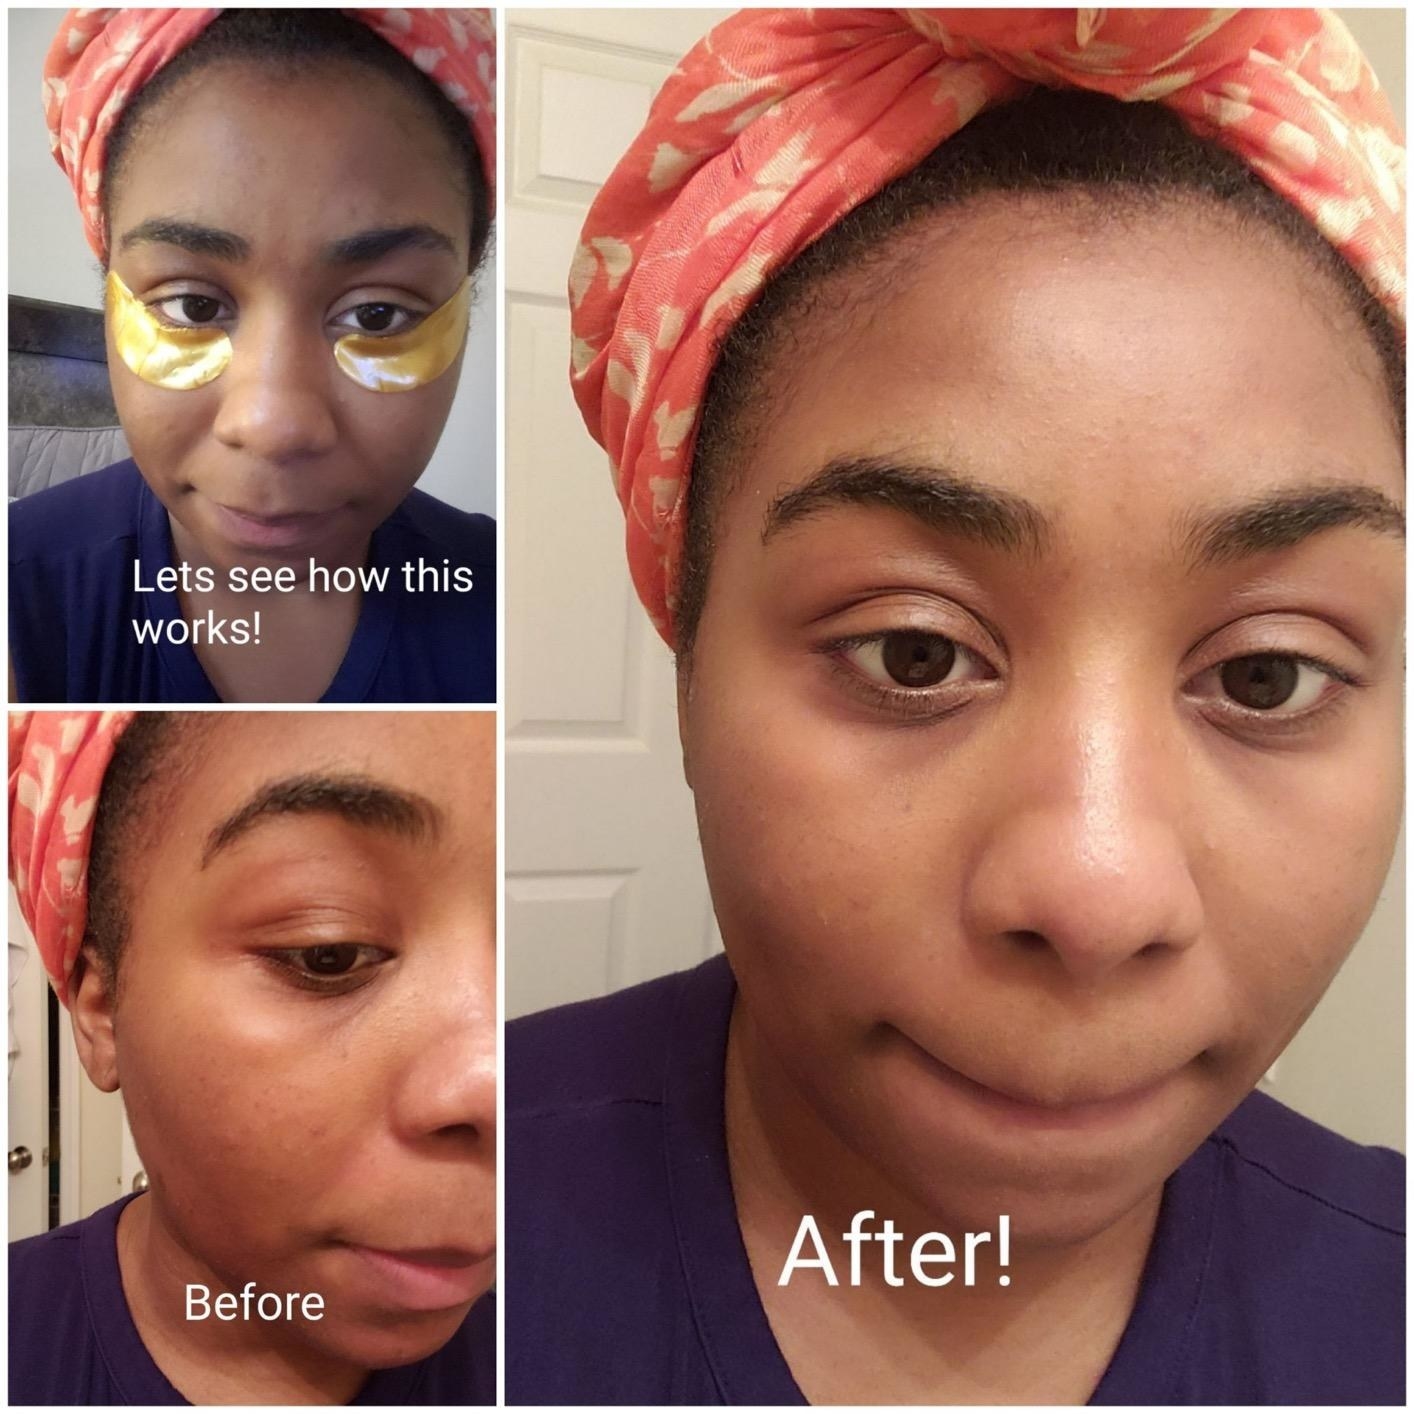 Reviewer wearing the eye patches, as well as their before and after photos showing the masks brightened the under-eye area